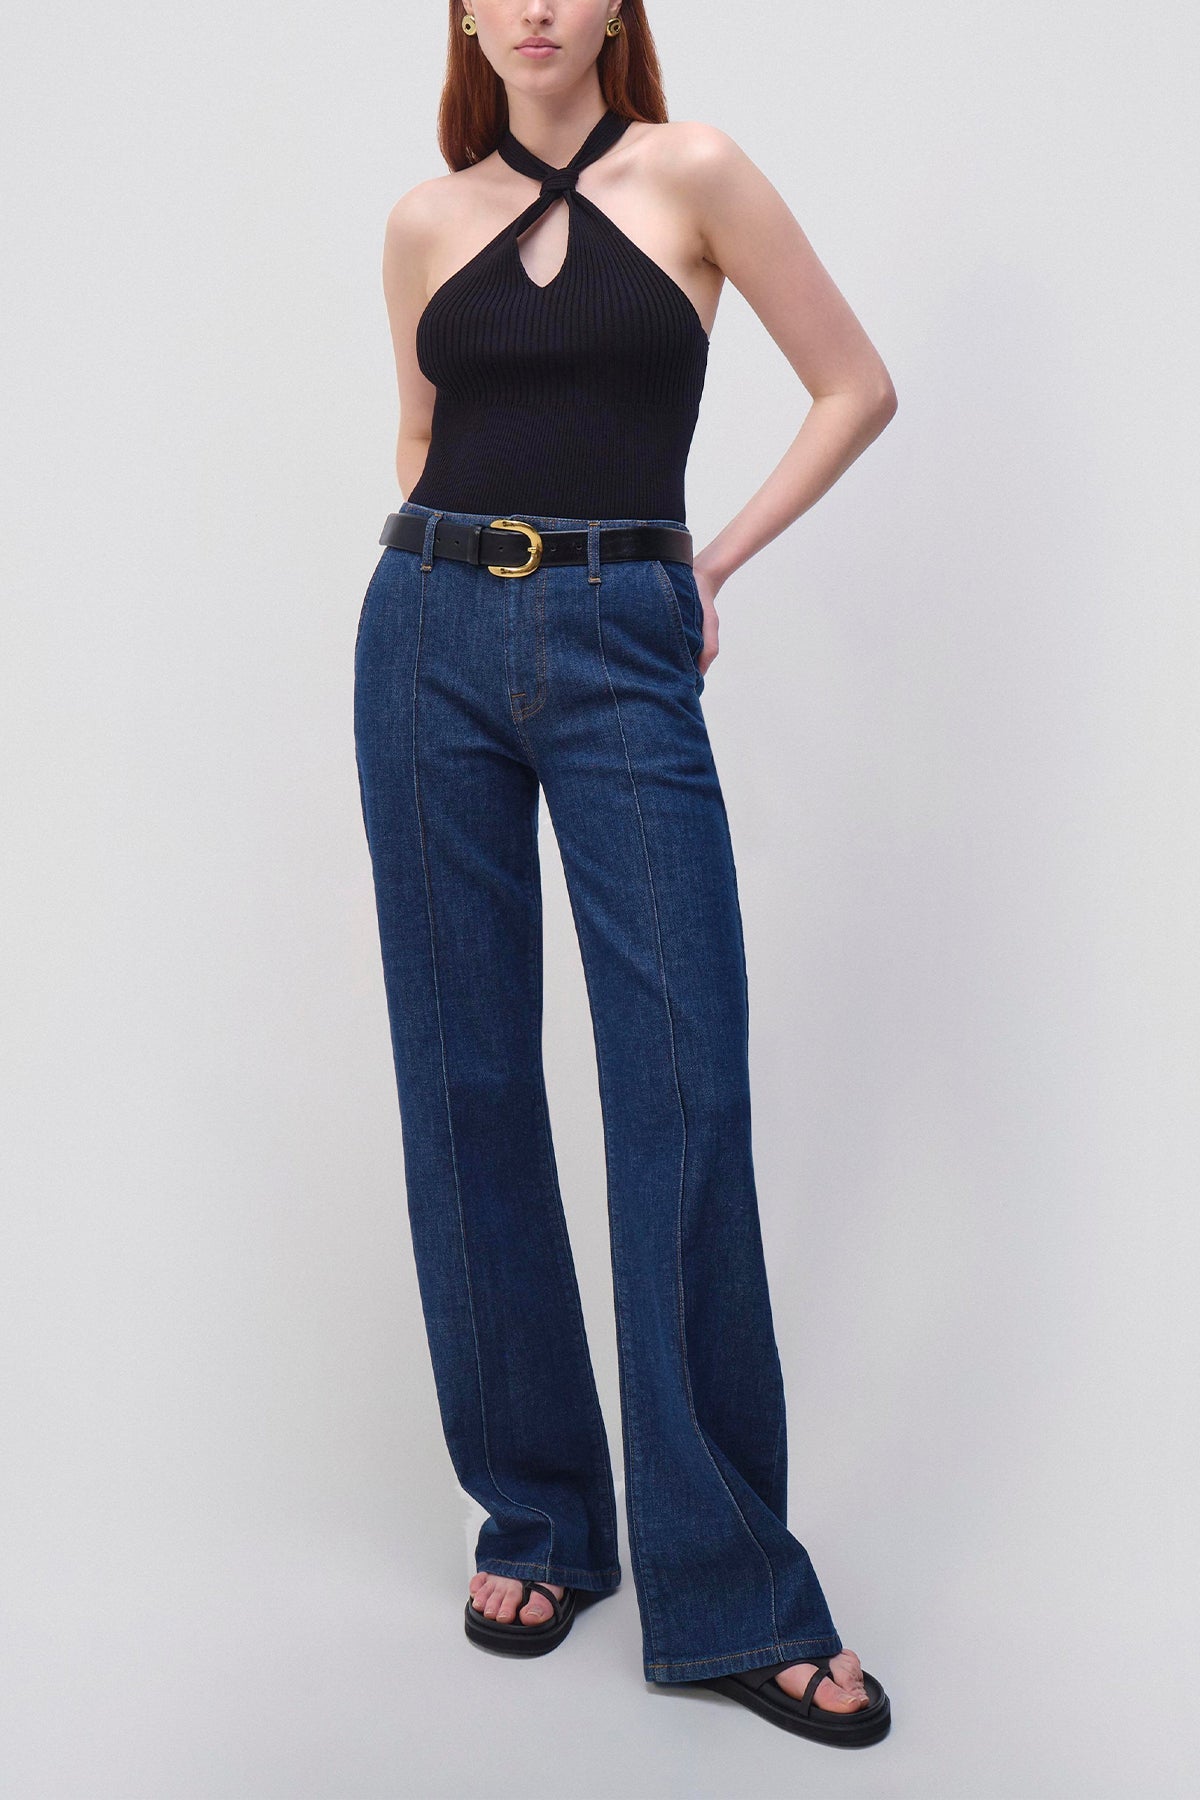 Ansel Trouser in Imperial - shop-olivia.com